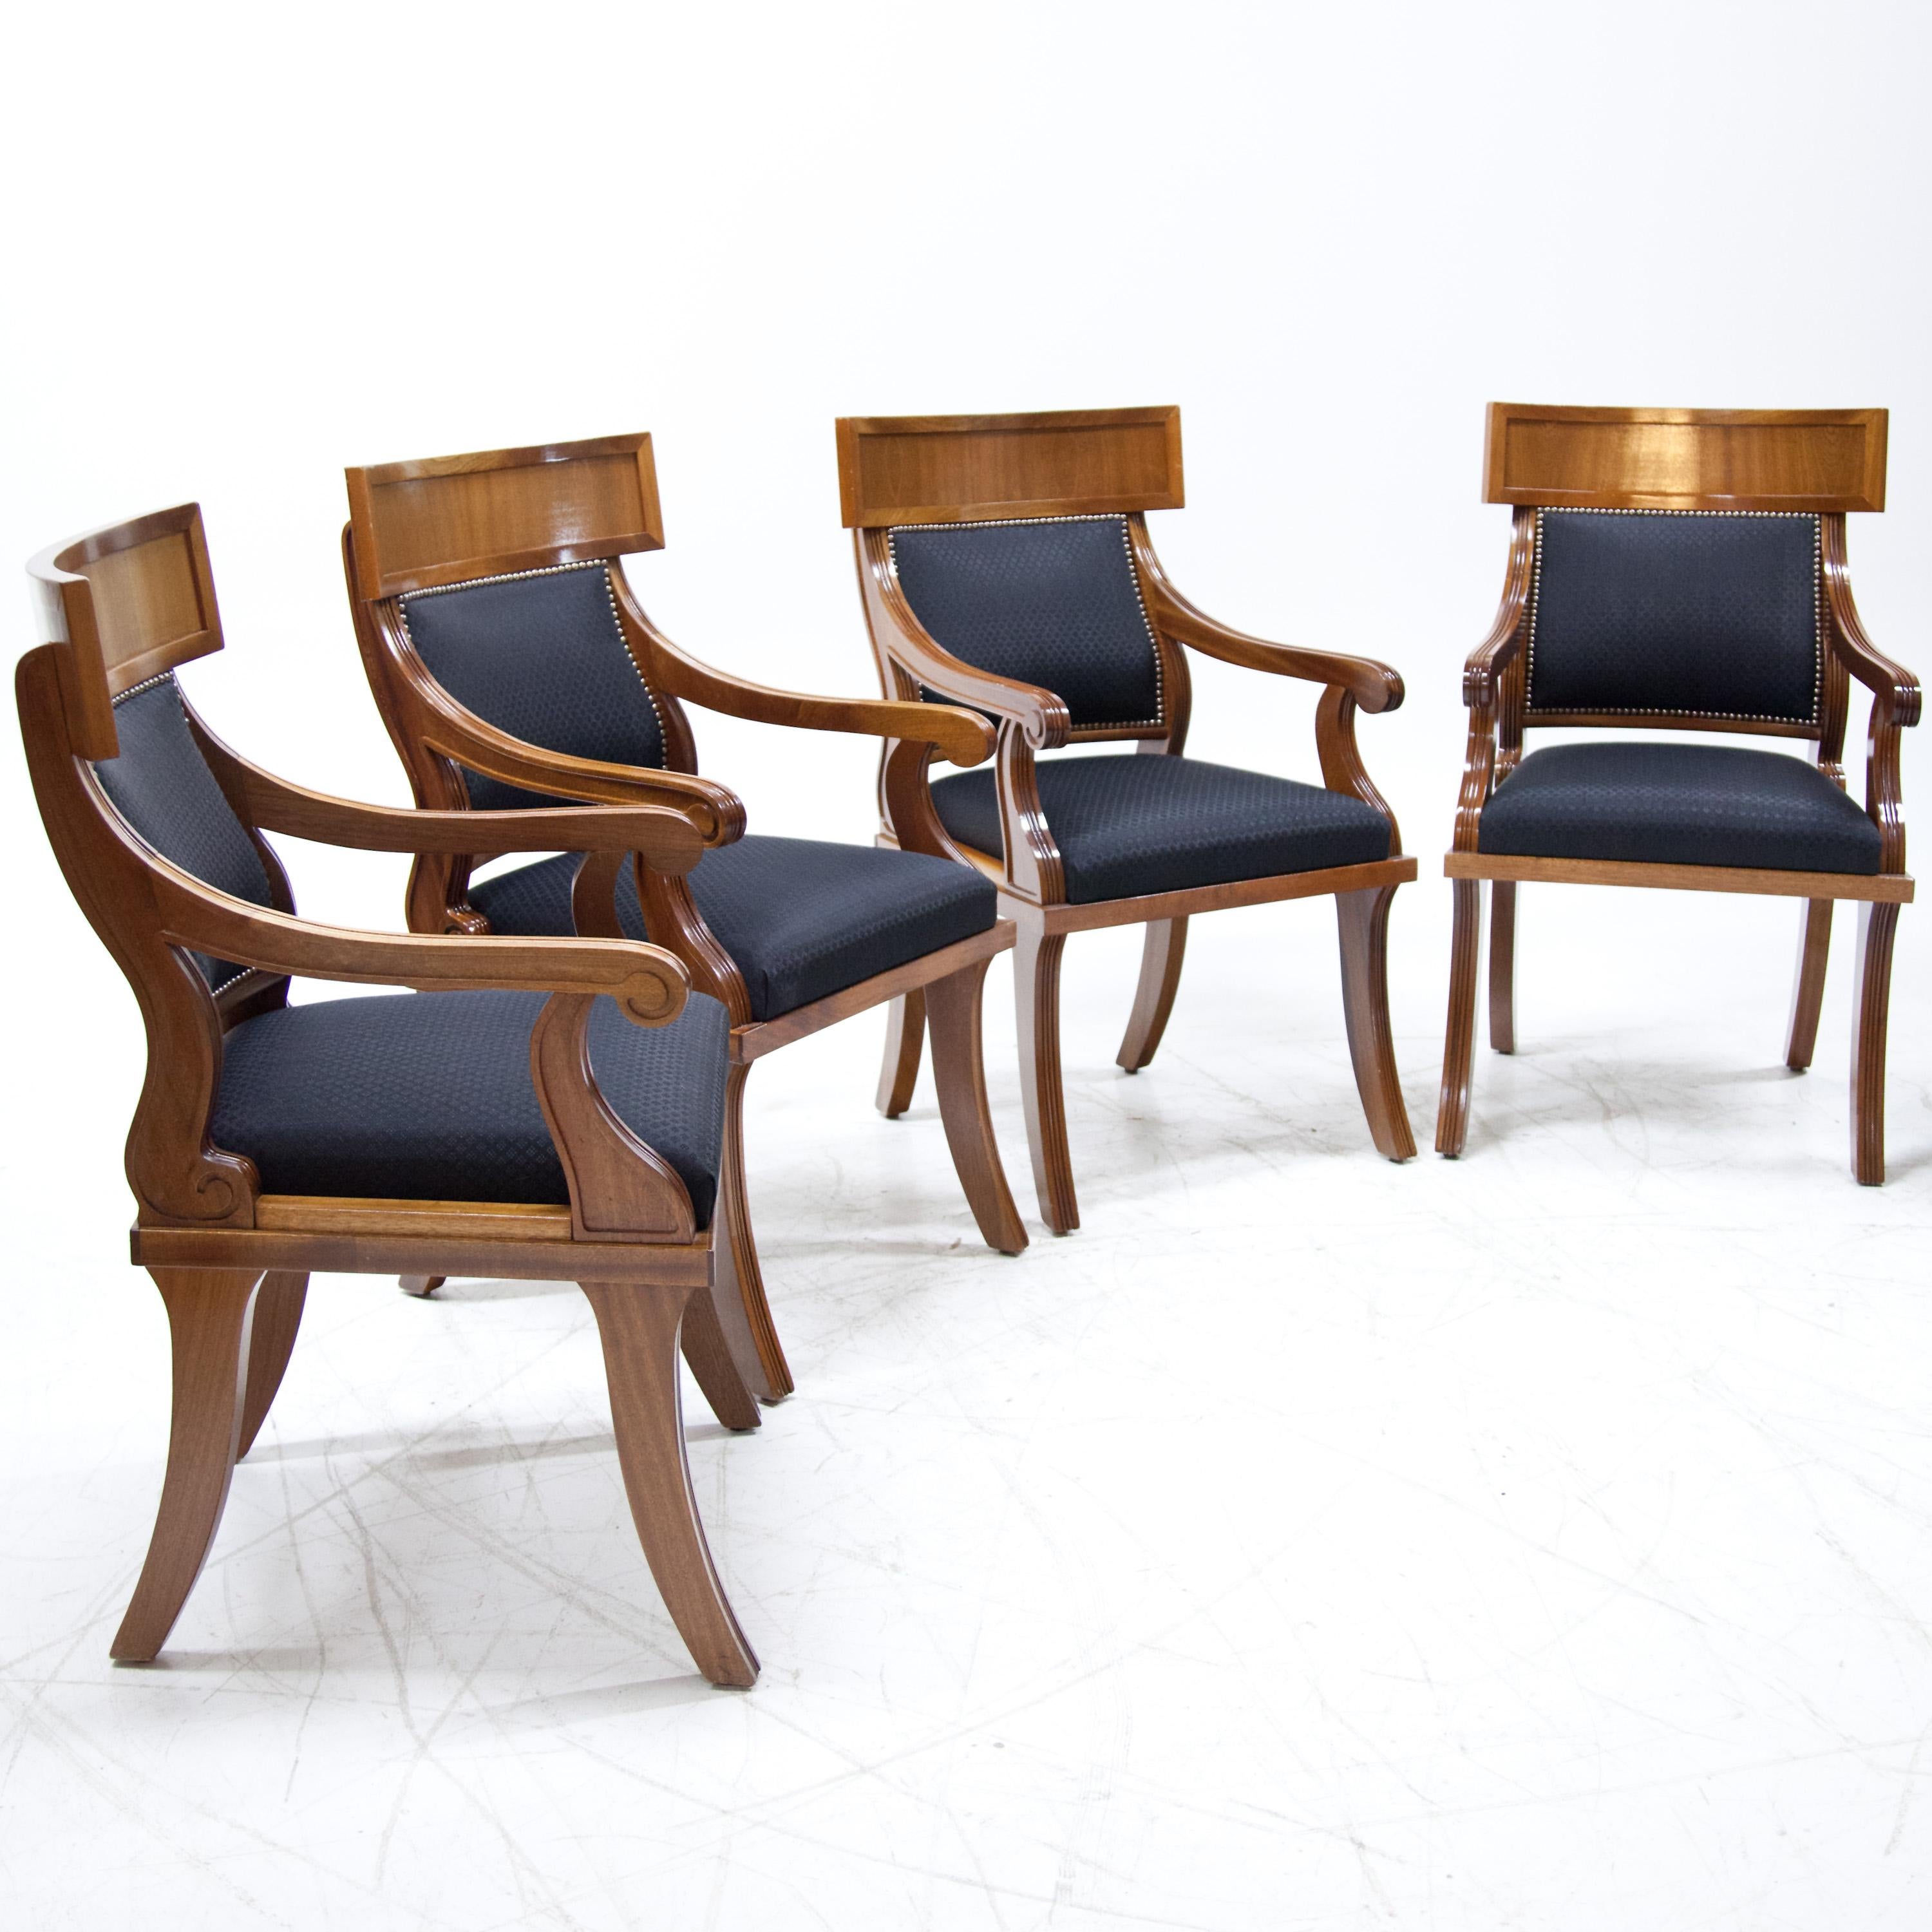 Set of six armchairs in late Biedermeier style with upholstered seat and backrest. These were newly covered with a dark blue fabric with a diamond pattern, the backrest was additionally decorated with rivets.